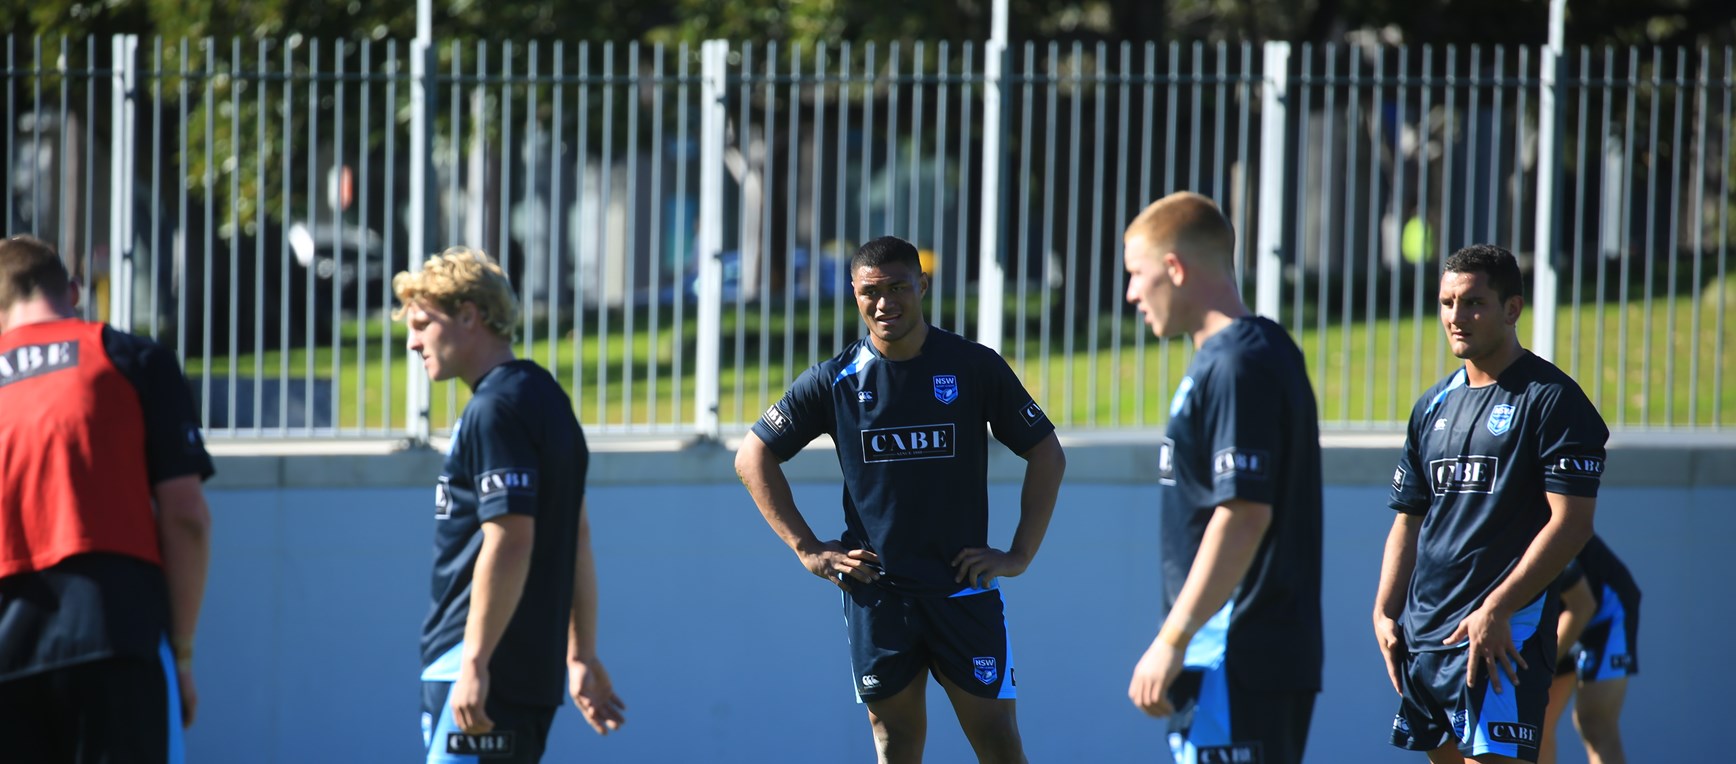 GALLERY | CABE NSW Under 20's Captains Run